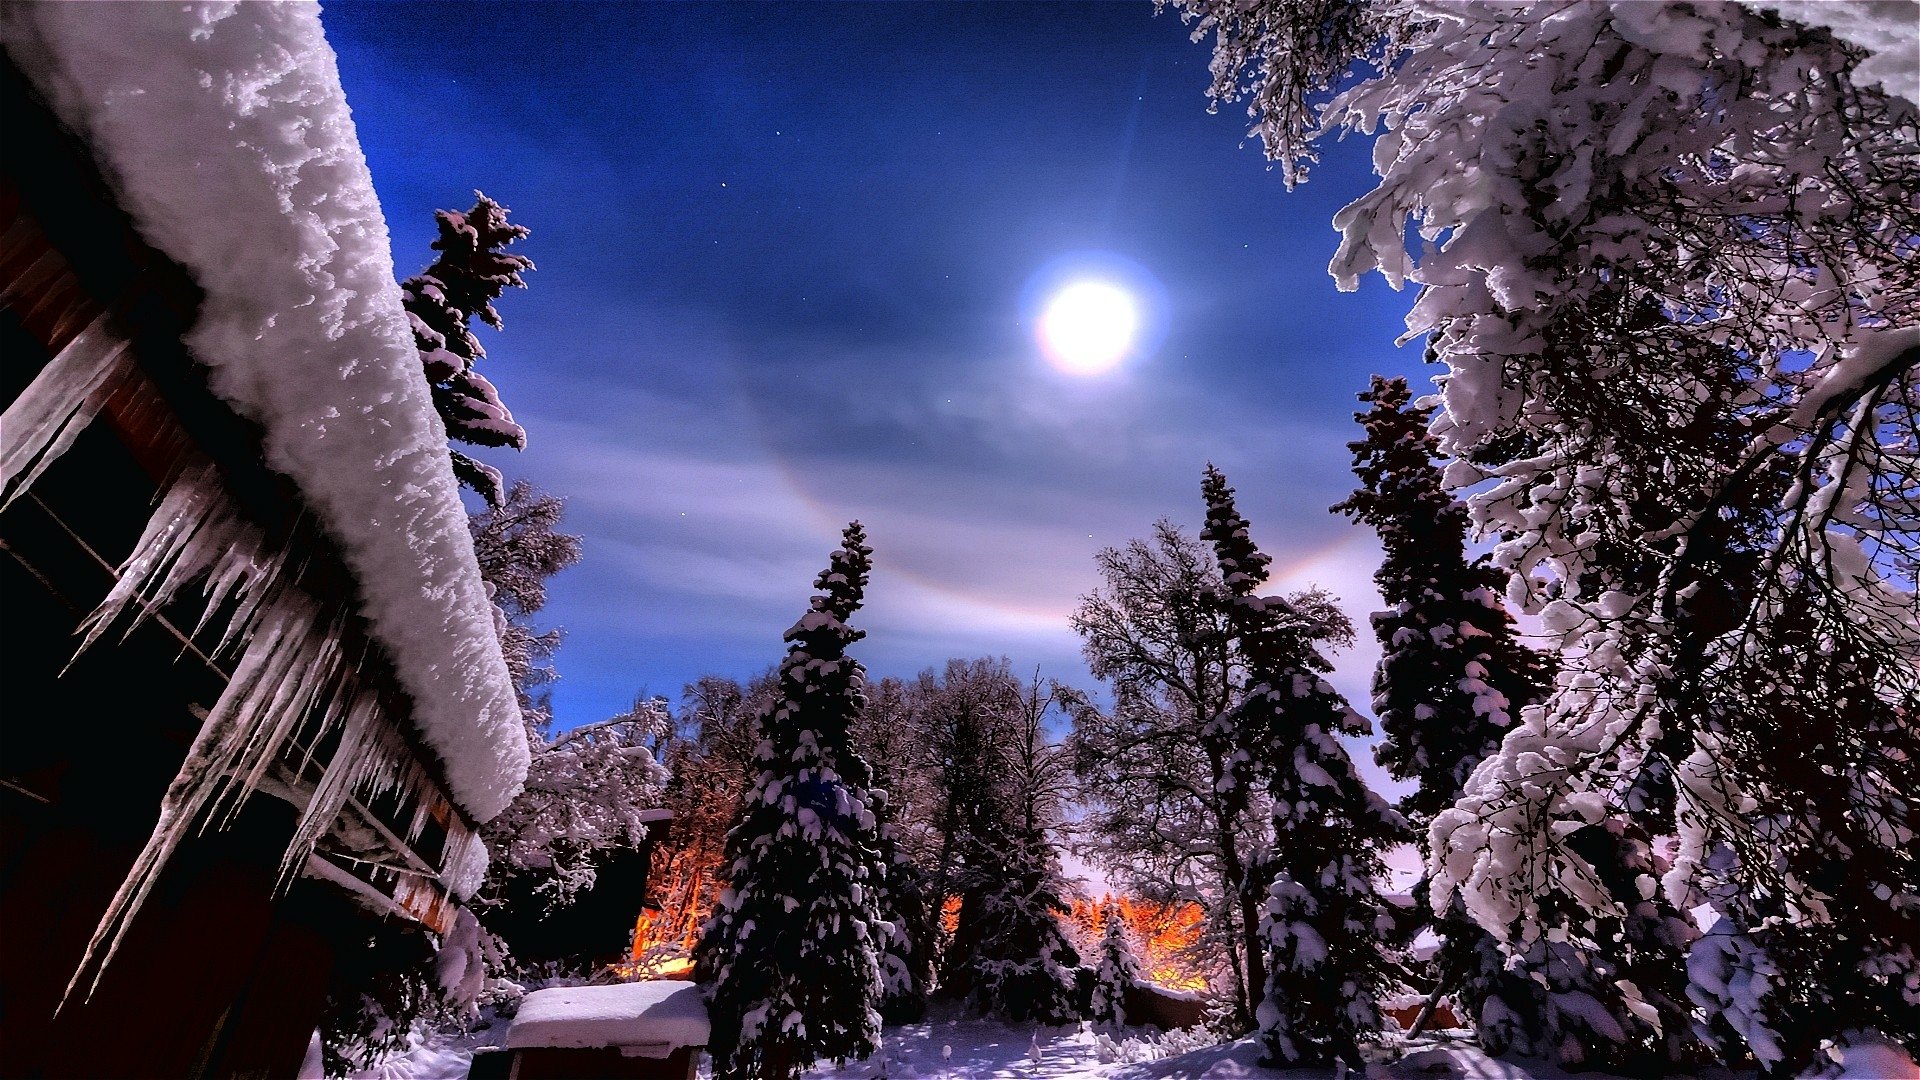 Full Moon over Winter Forest HD Wallpaper | Background Image ...